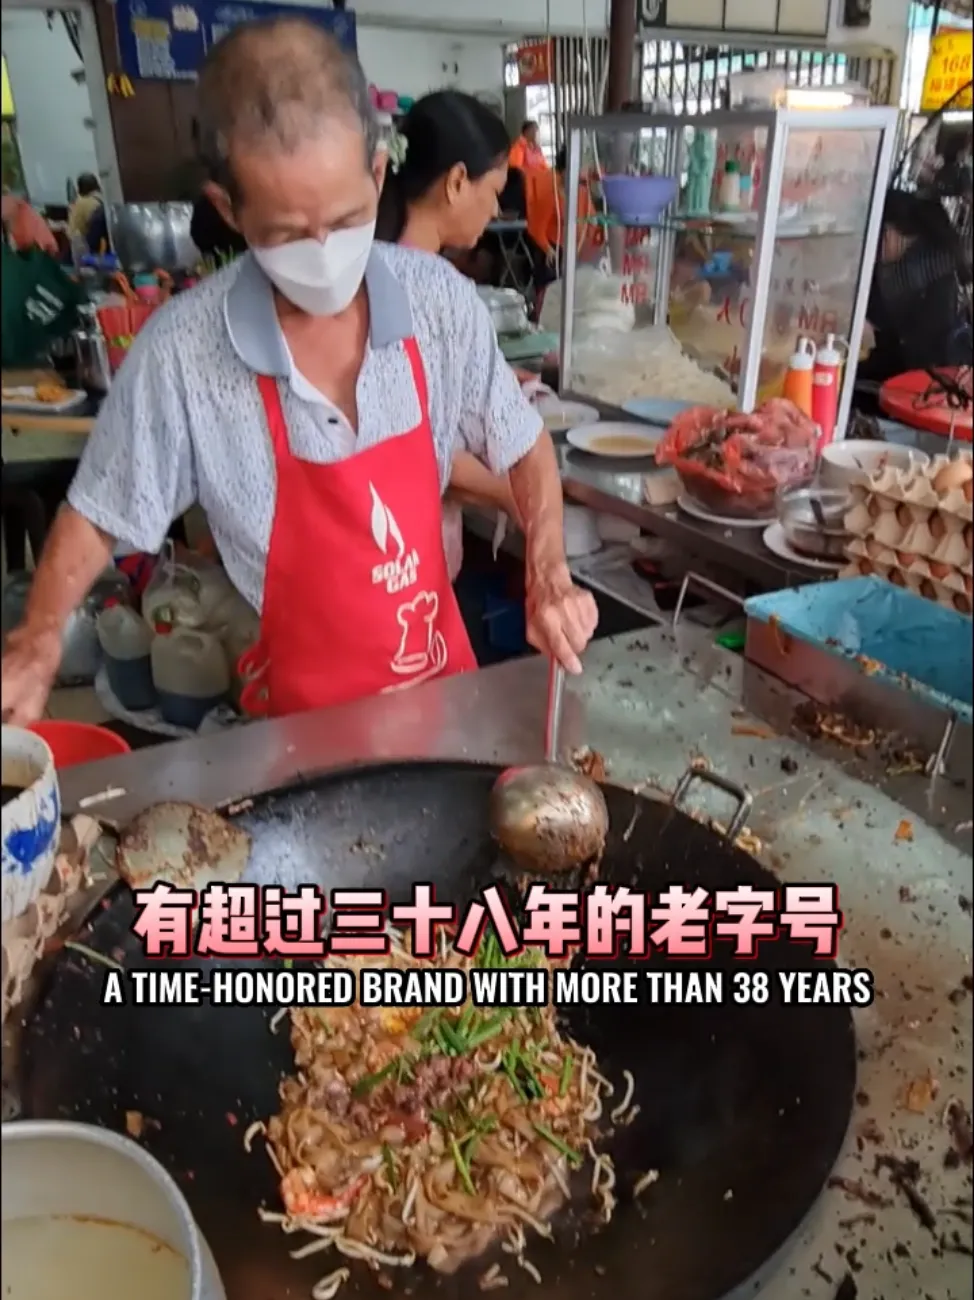 38 YEARS OLD CHAR KWAY TEOW OPPOSITE KSL CITY MALL's images